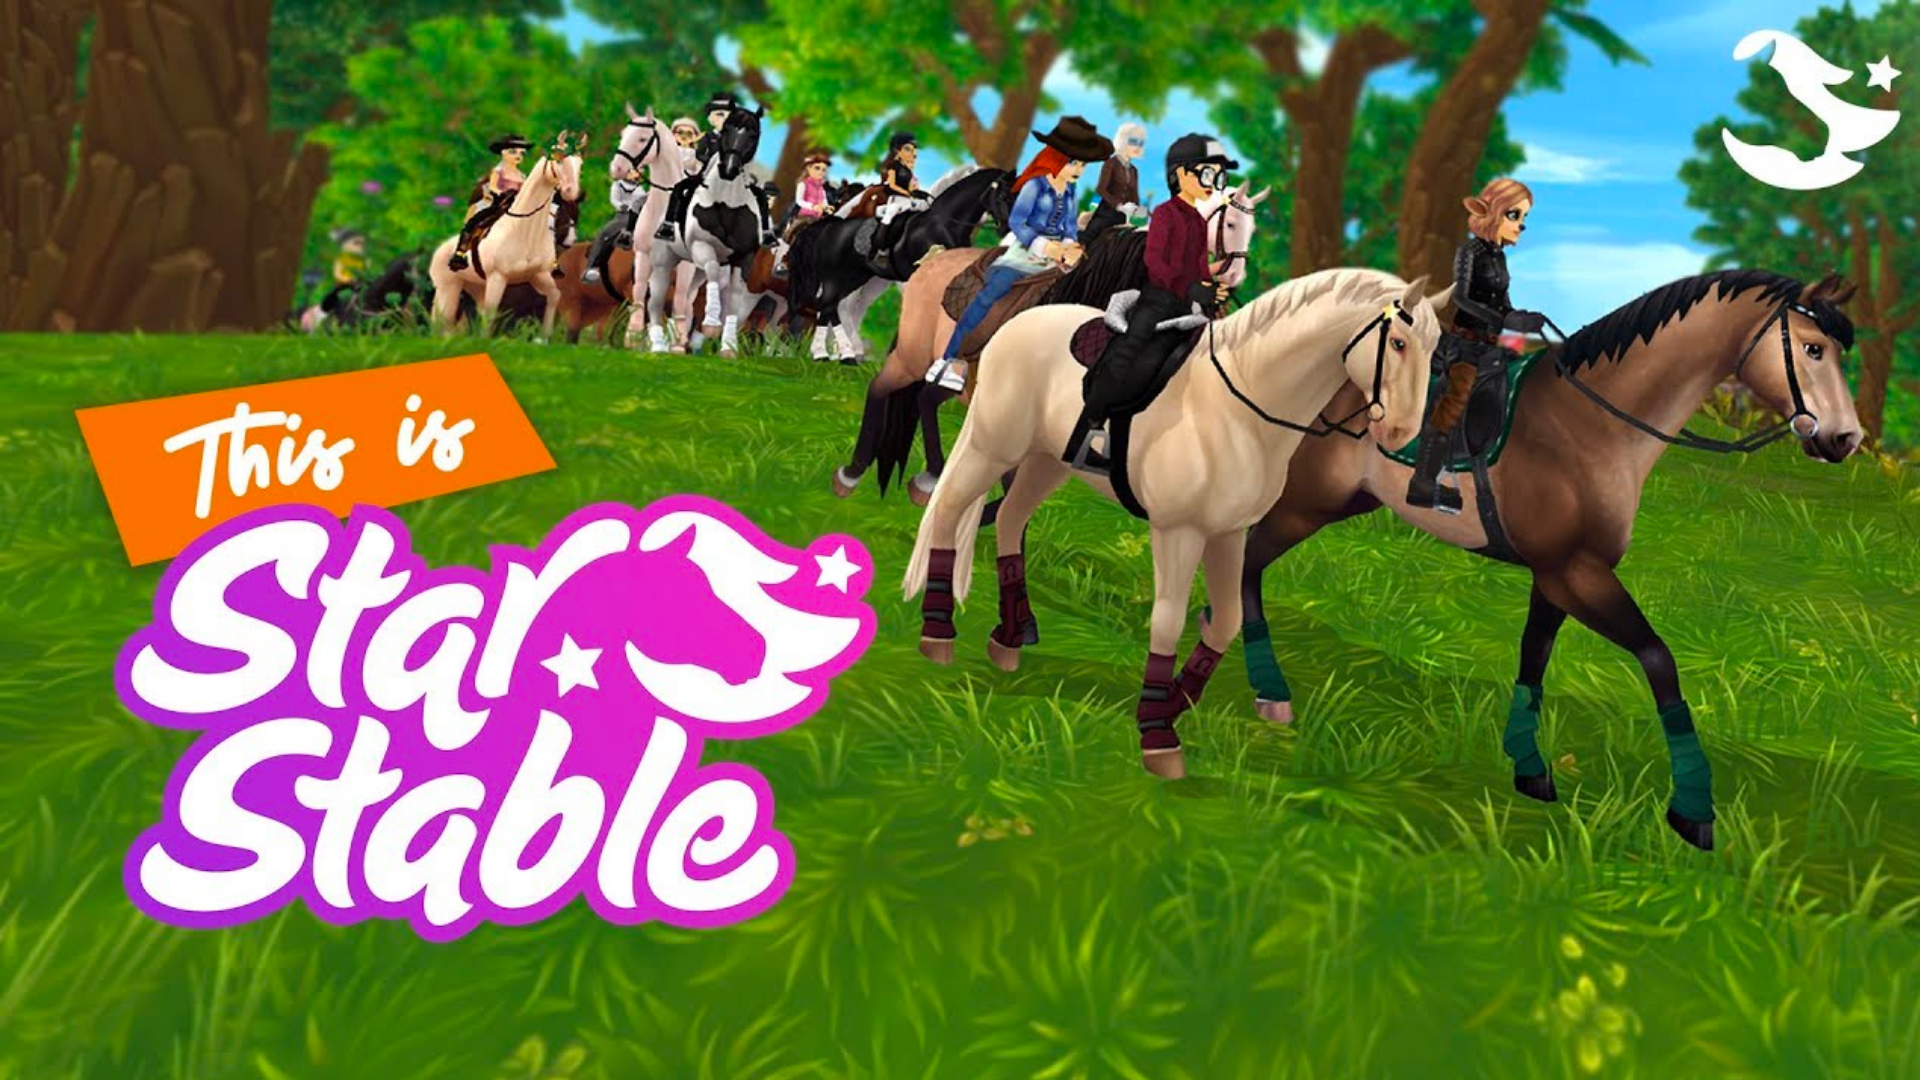 Precise TV & Star Stable: increasing game registrations on YouTube & reducing CPA by 40%